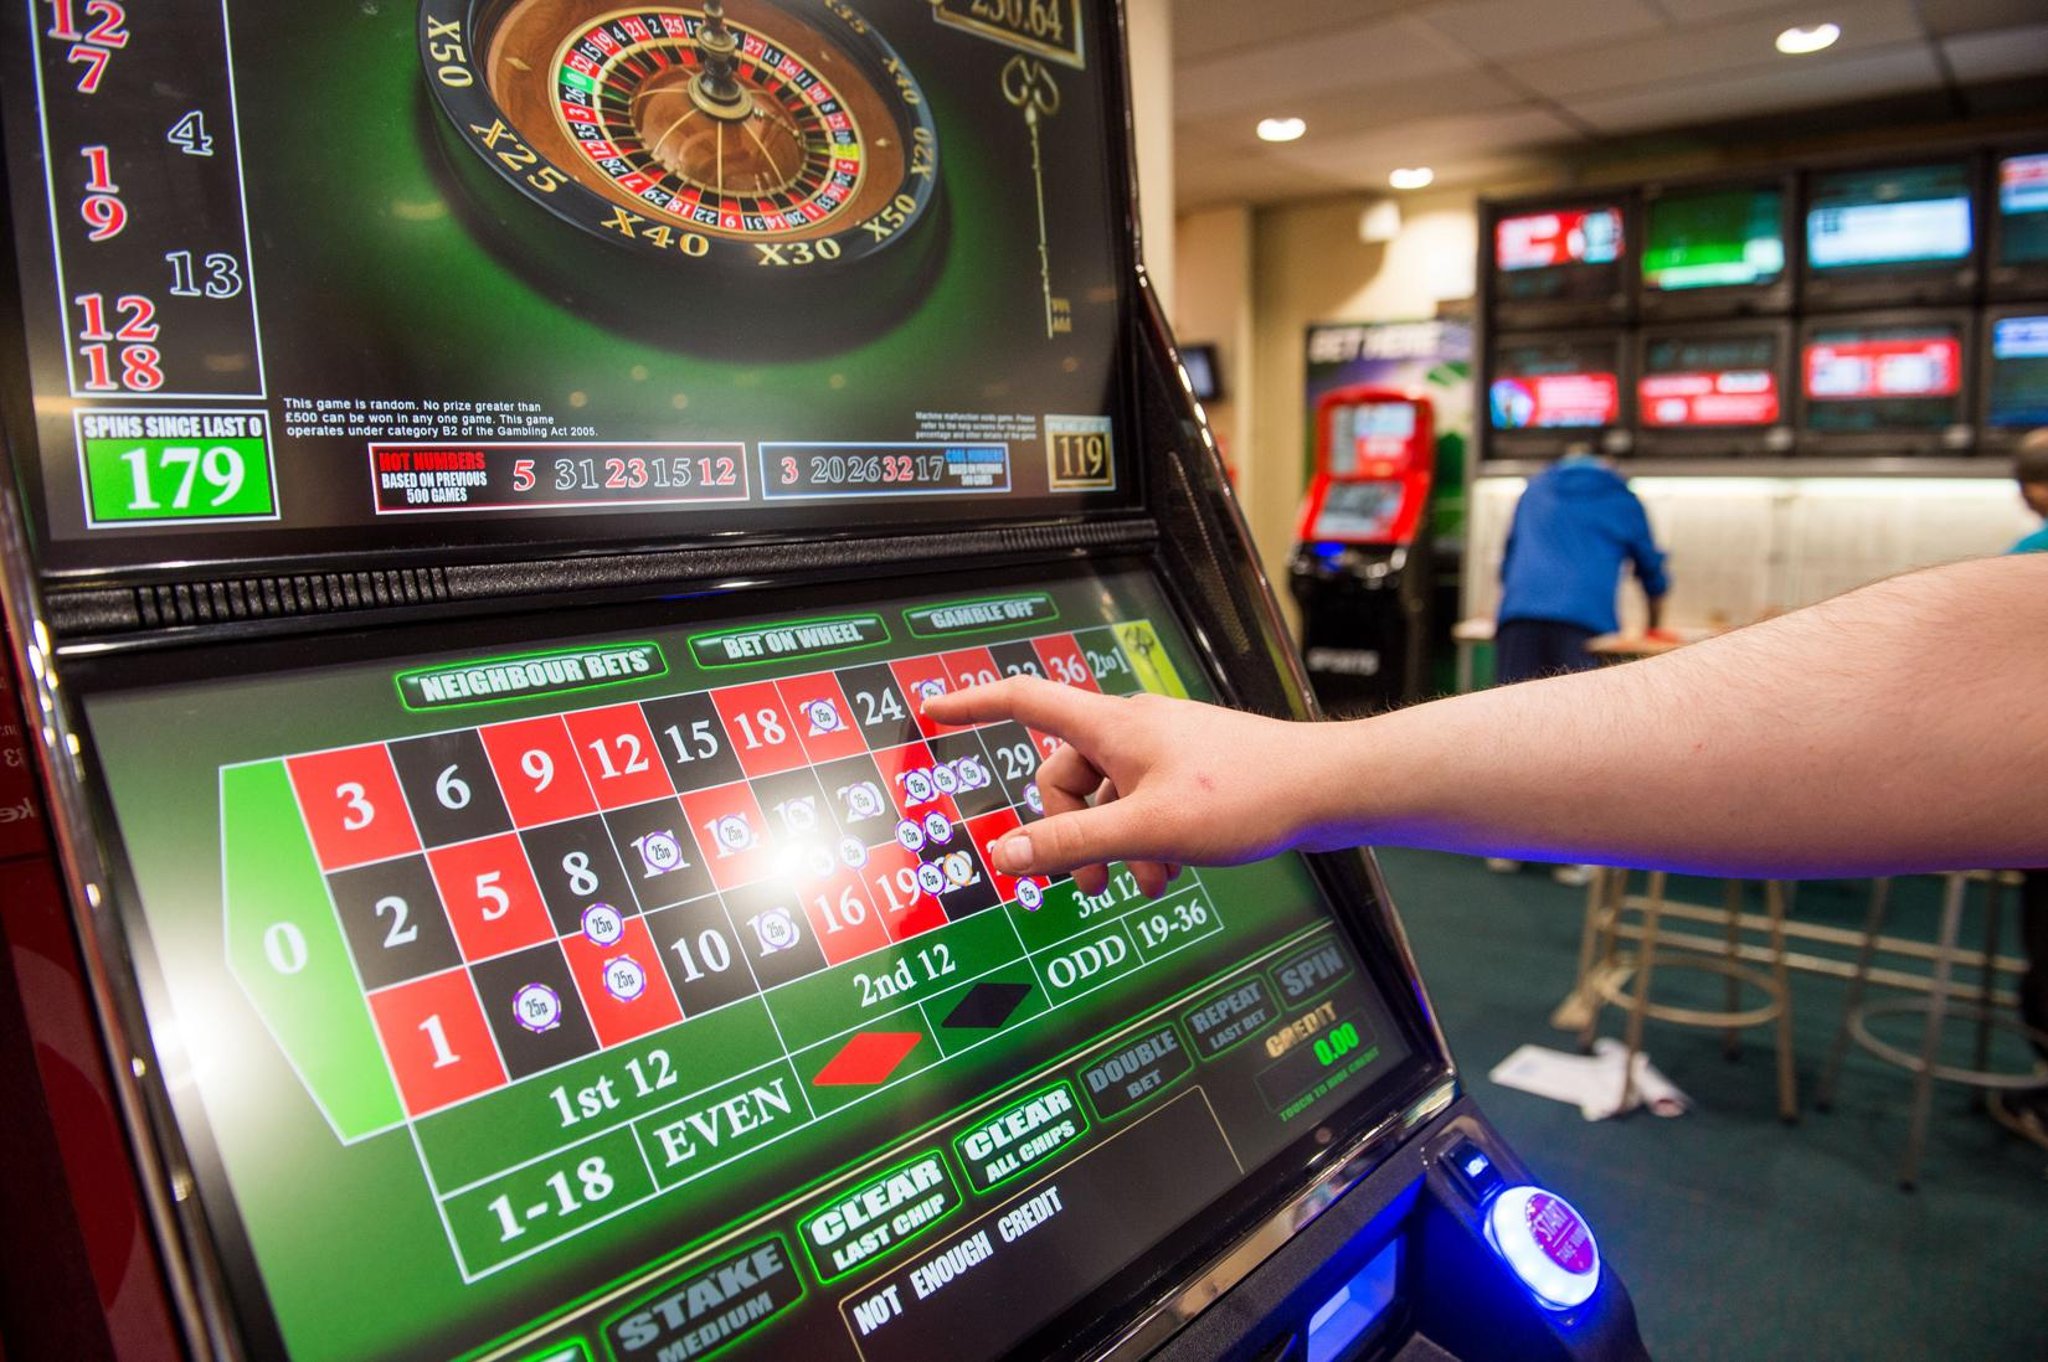 Covid: How online gambling addiction has become an added threat to our health during the pandemic – Steve Cardownie | Edinburgh News